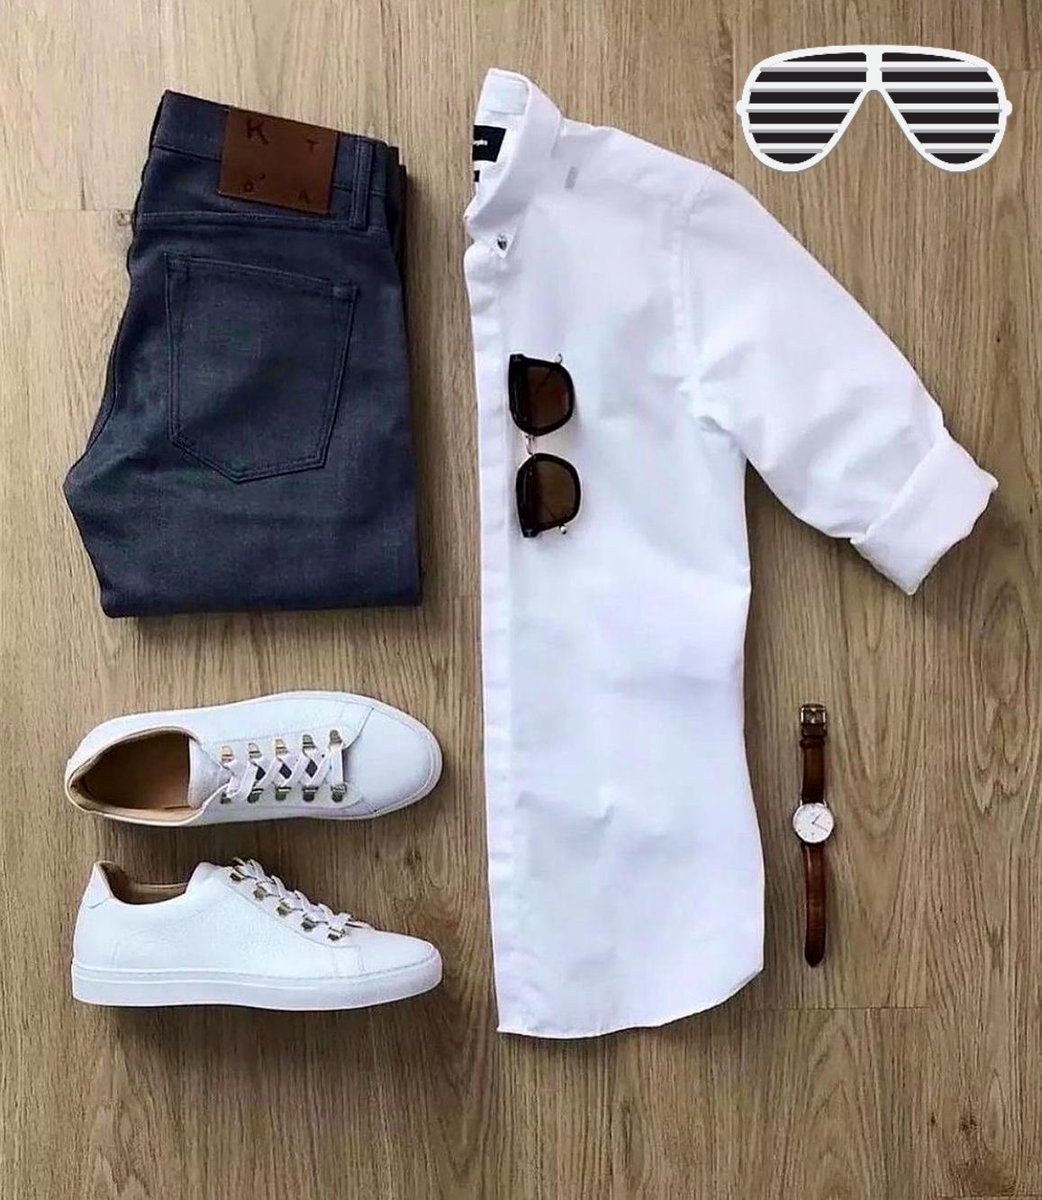 White shirt 👕 with Black jean and White Sneakers. This outfit is best for meetings at office.